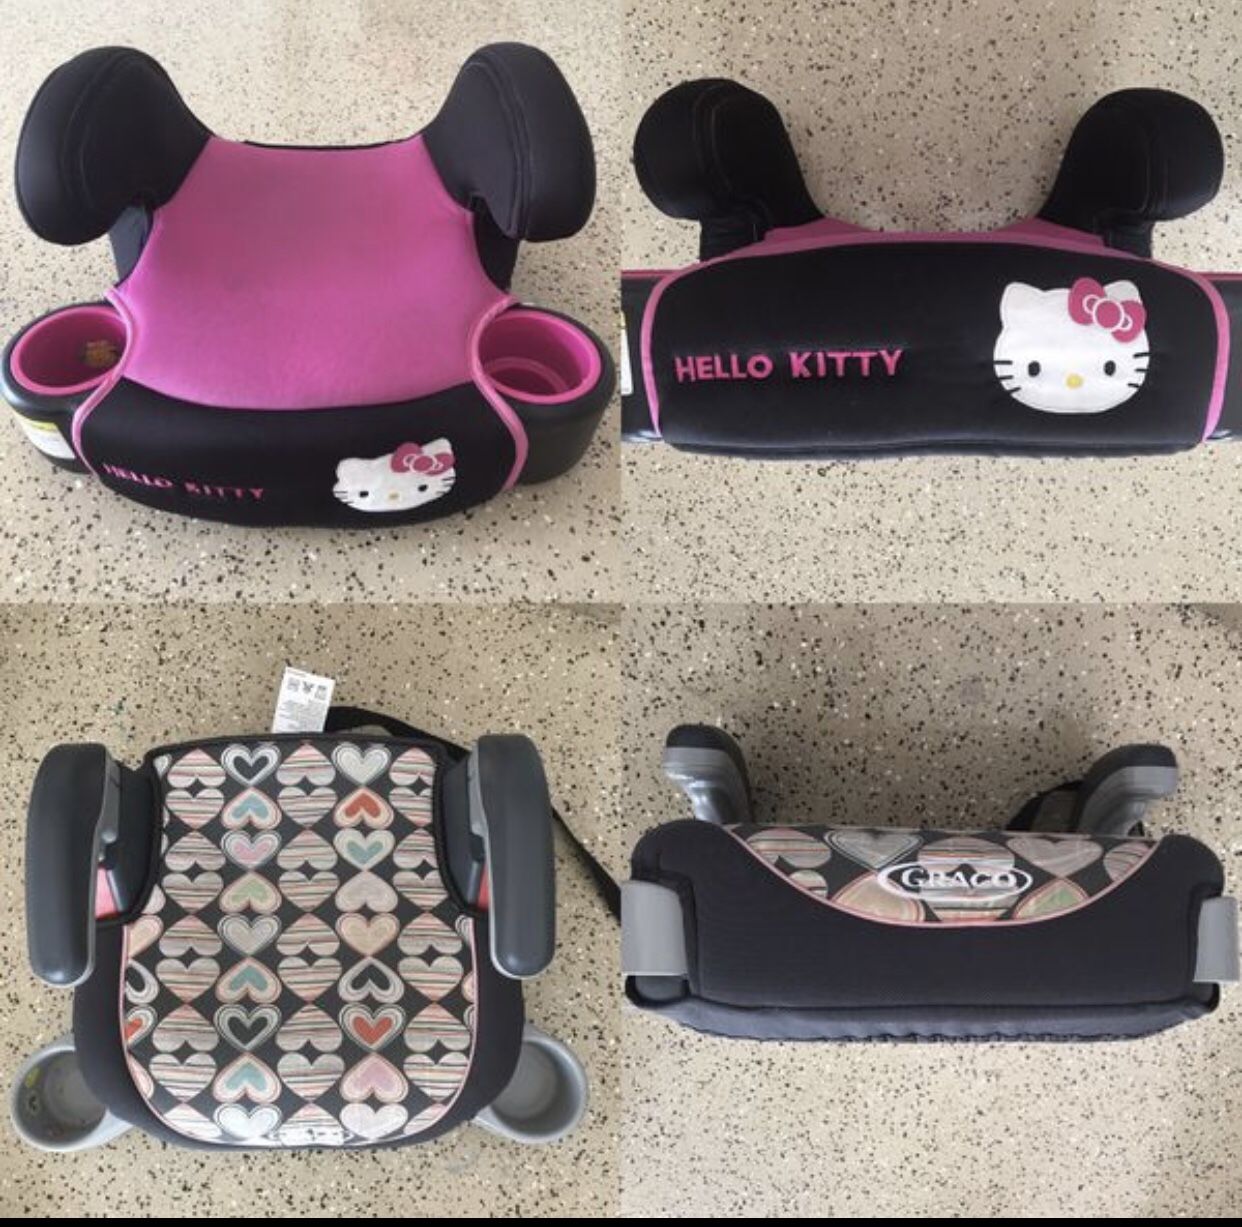 Two (2) Child Kids Booster Car Seat - two itens for 34.00 or 19.00 each